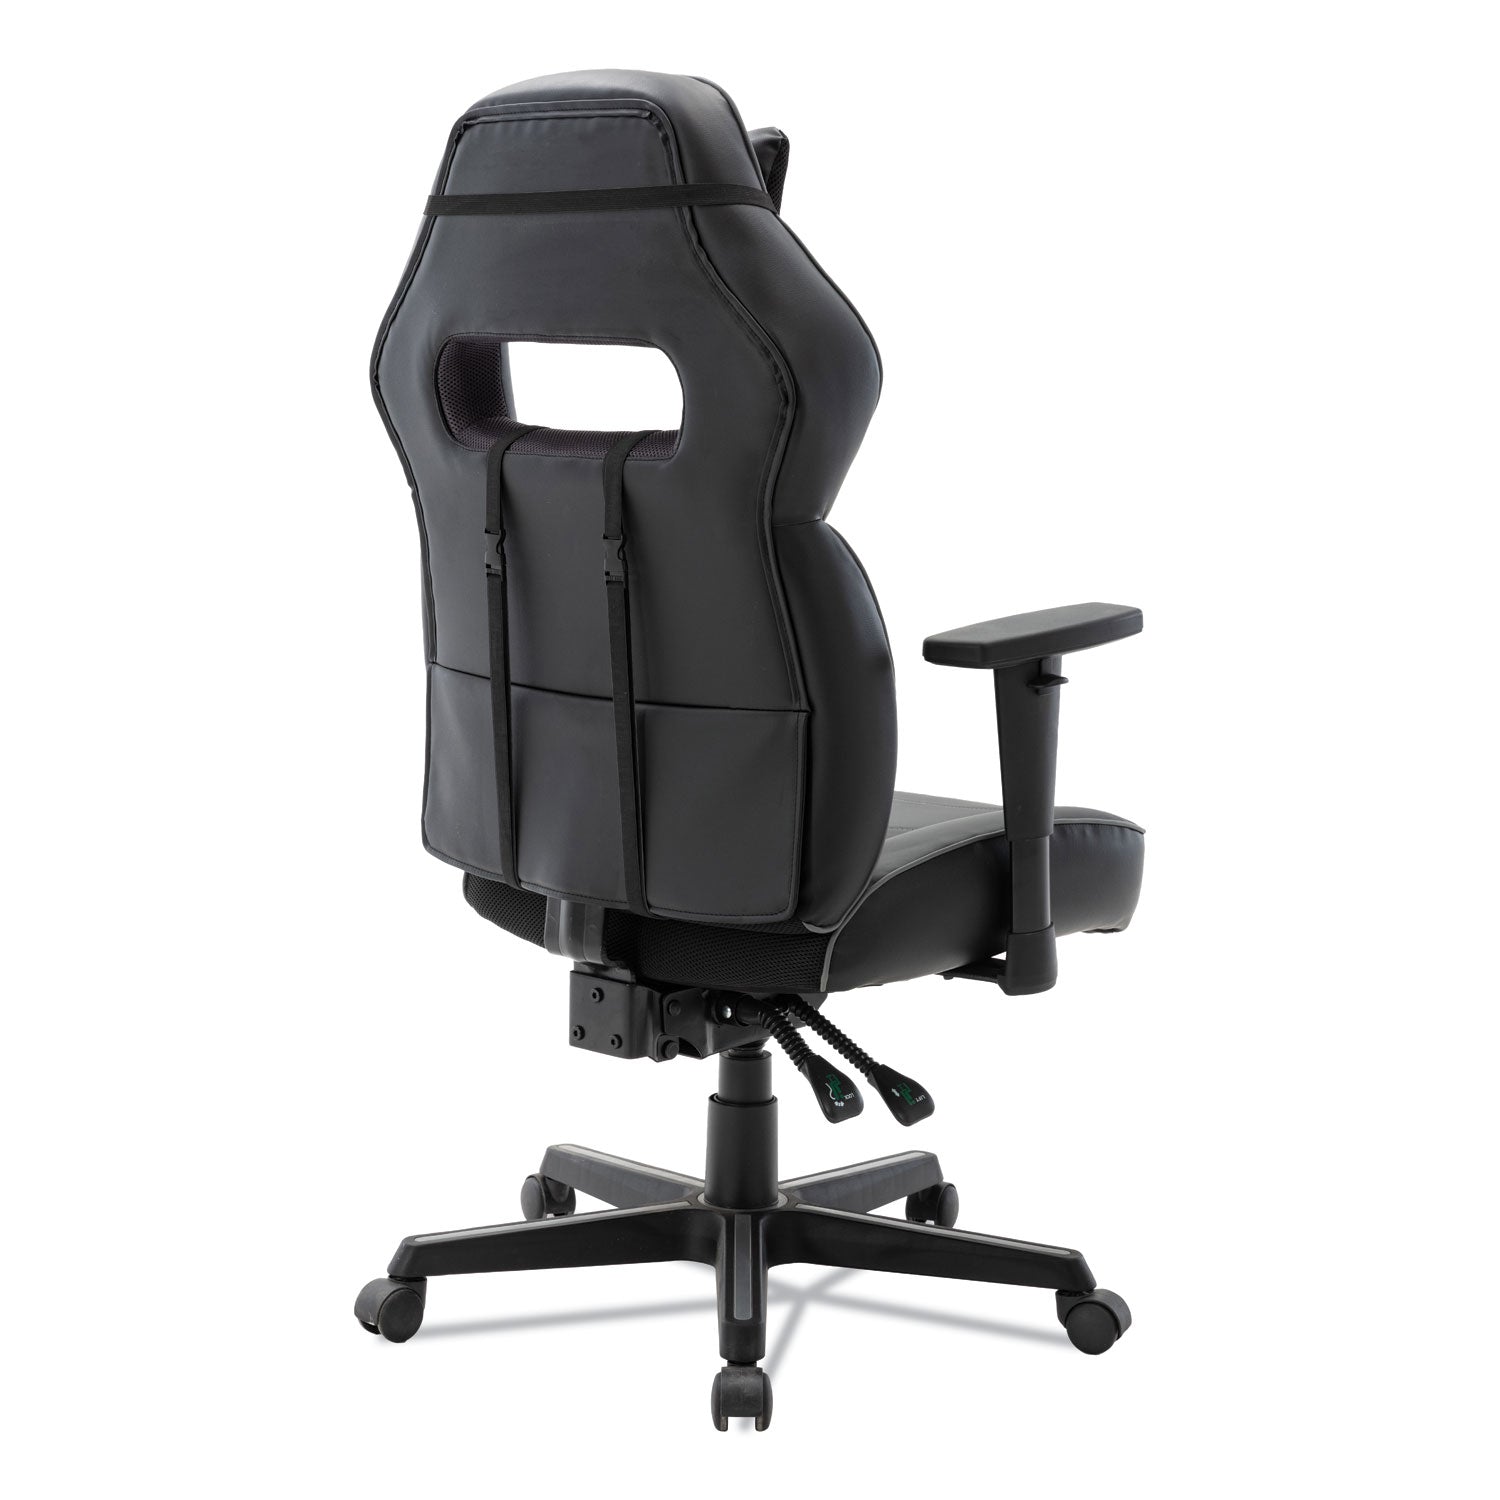 racing-style-ergonomic-gaming-chair-supports-275-lb-1591-to-198-seat-height-black-gray-trim-seat-back-black-gray-base_alegm4146 - 6